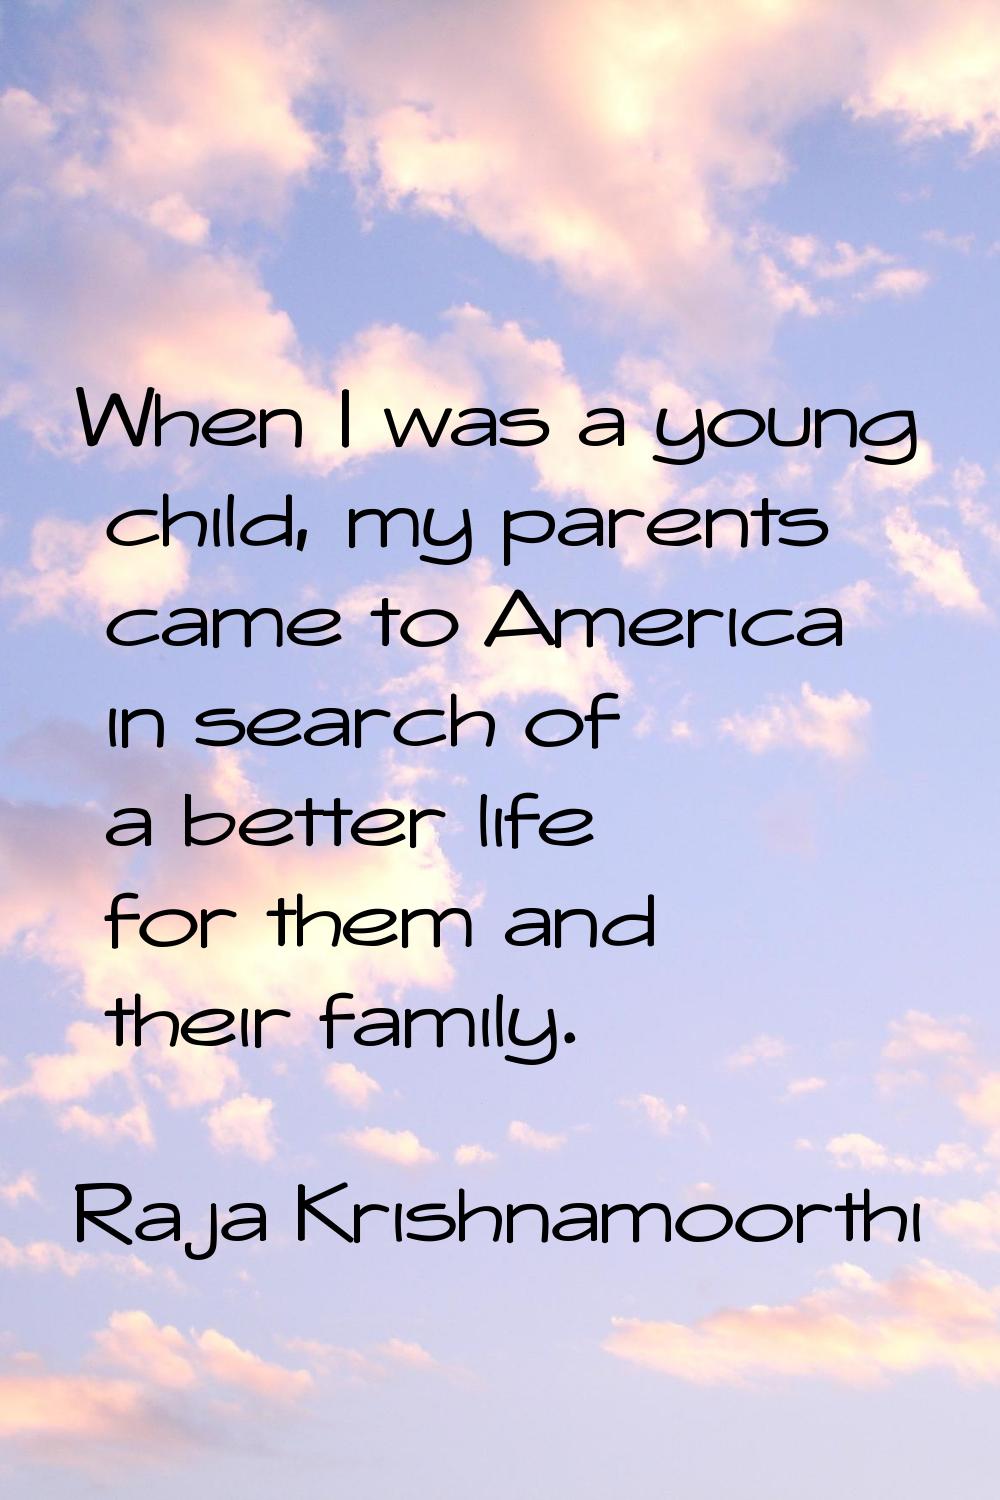 When I was a young child, my parents came to America in search of a better life for them and their 